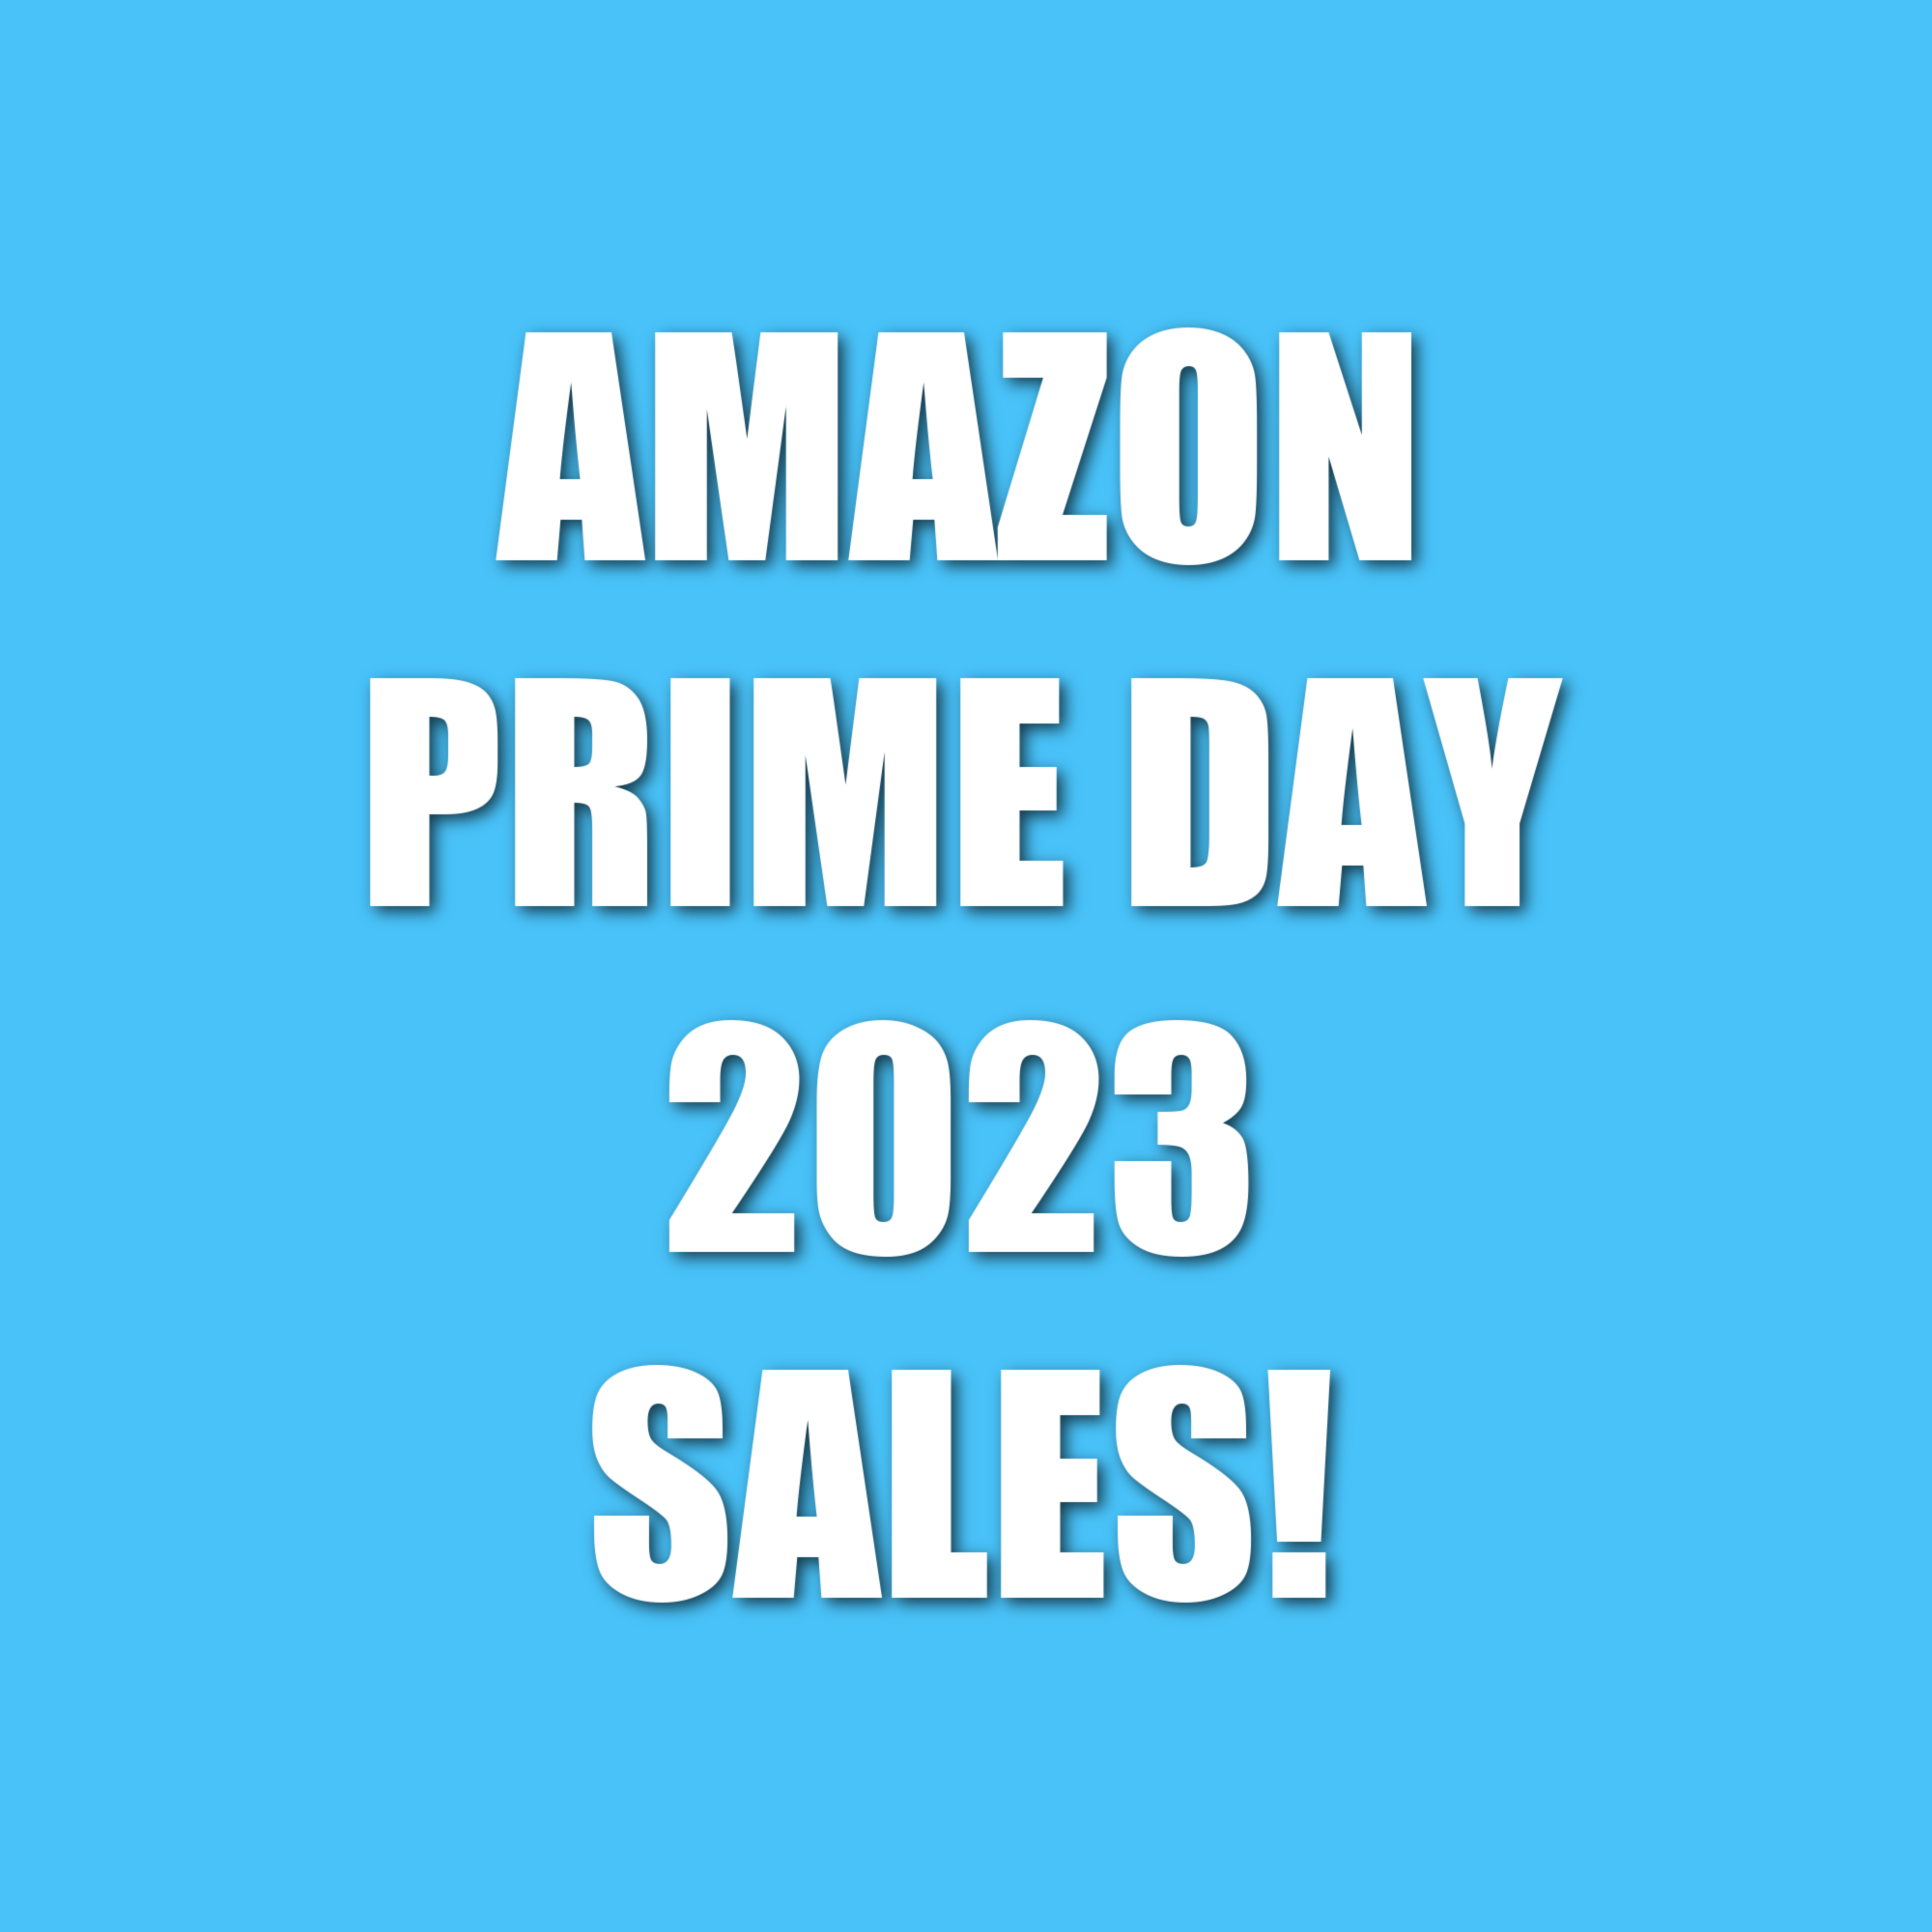 Amazon Prime Day is Here!